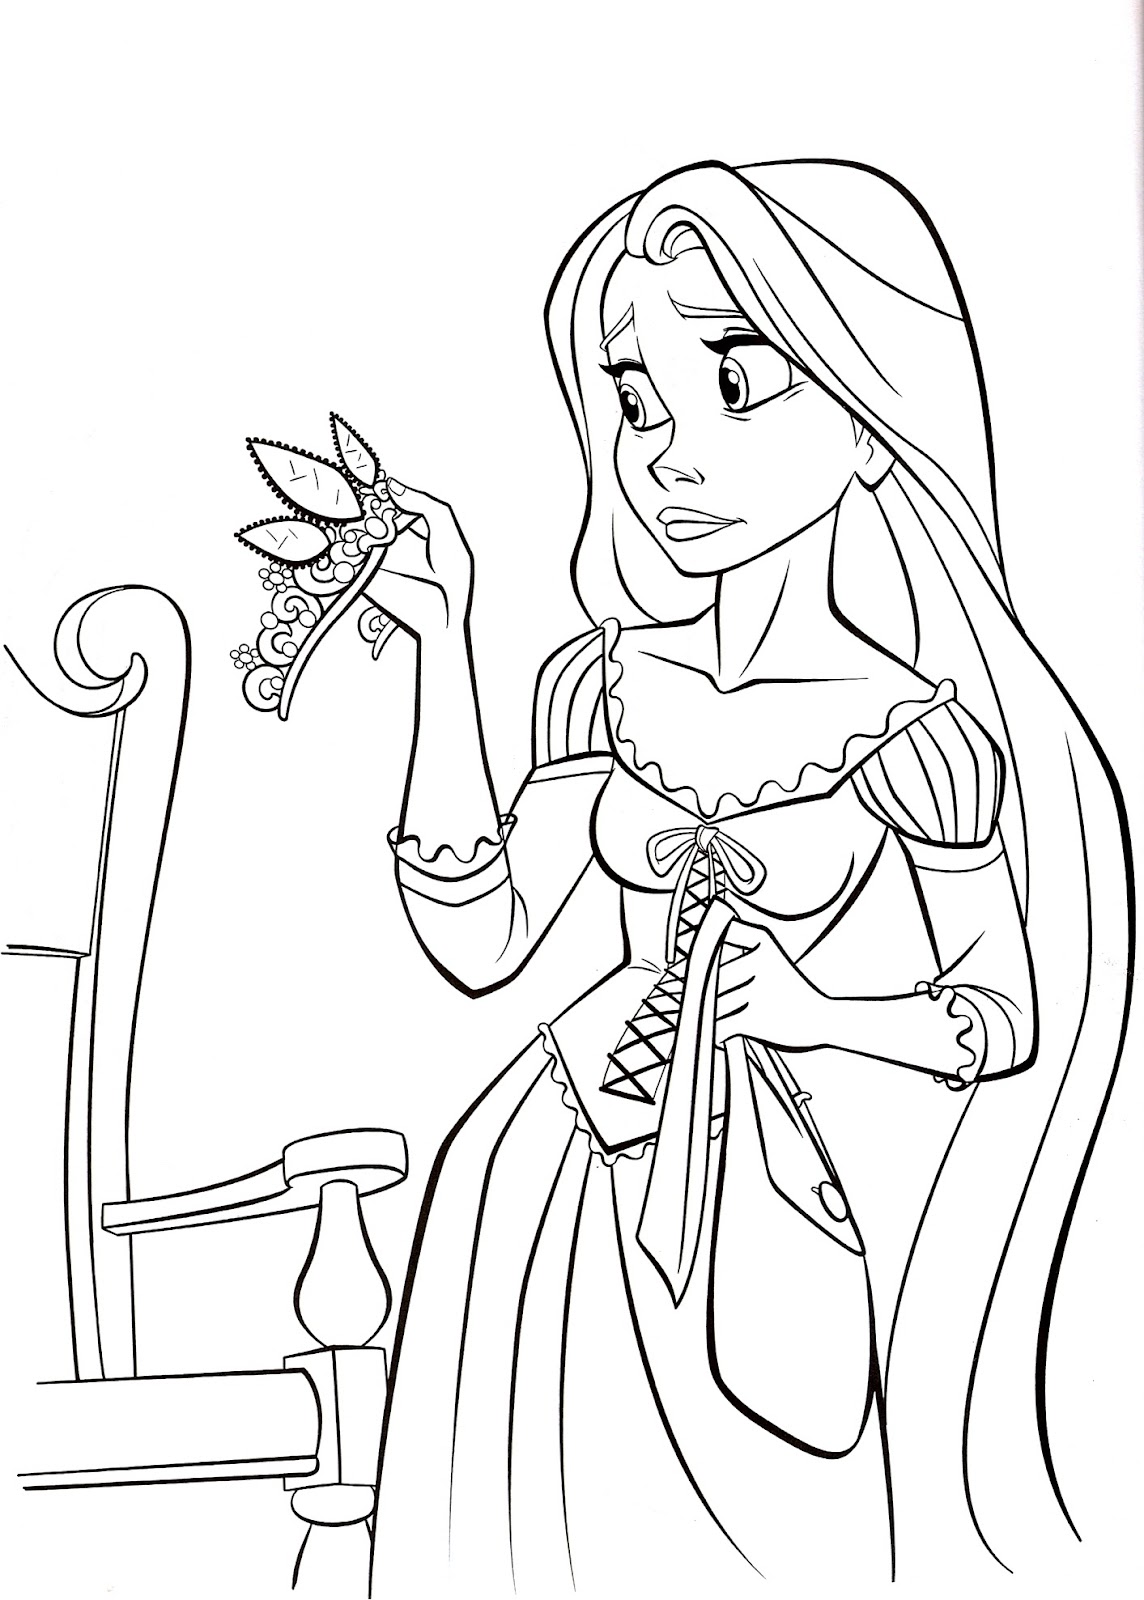 Top 10 Detailed Disney Coloring Pages Drawing - Coloring Pages Free for